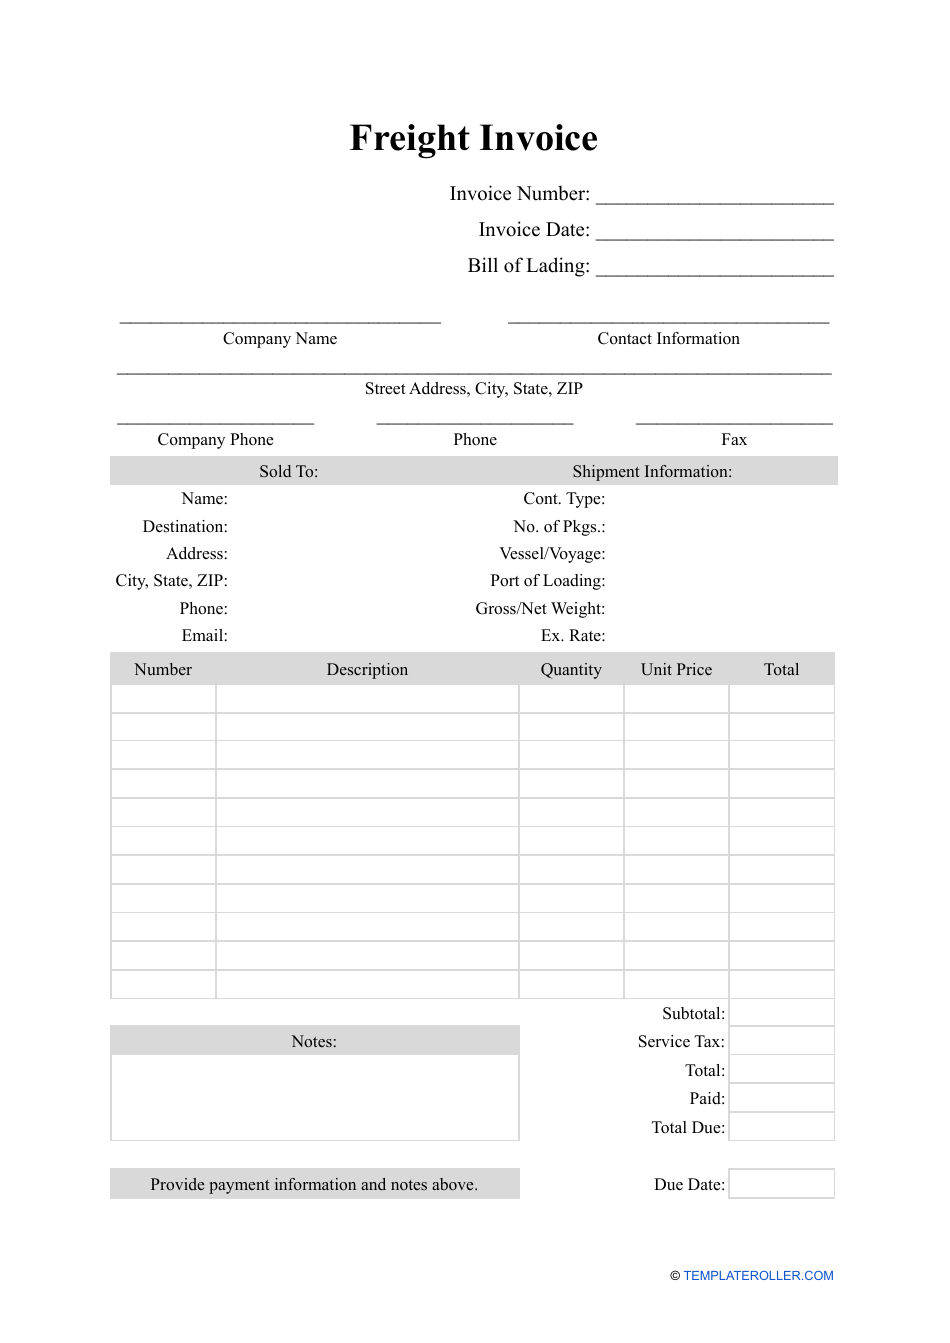 Freight Invoice Template, Page 1